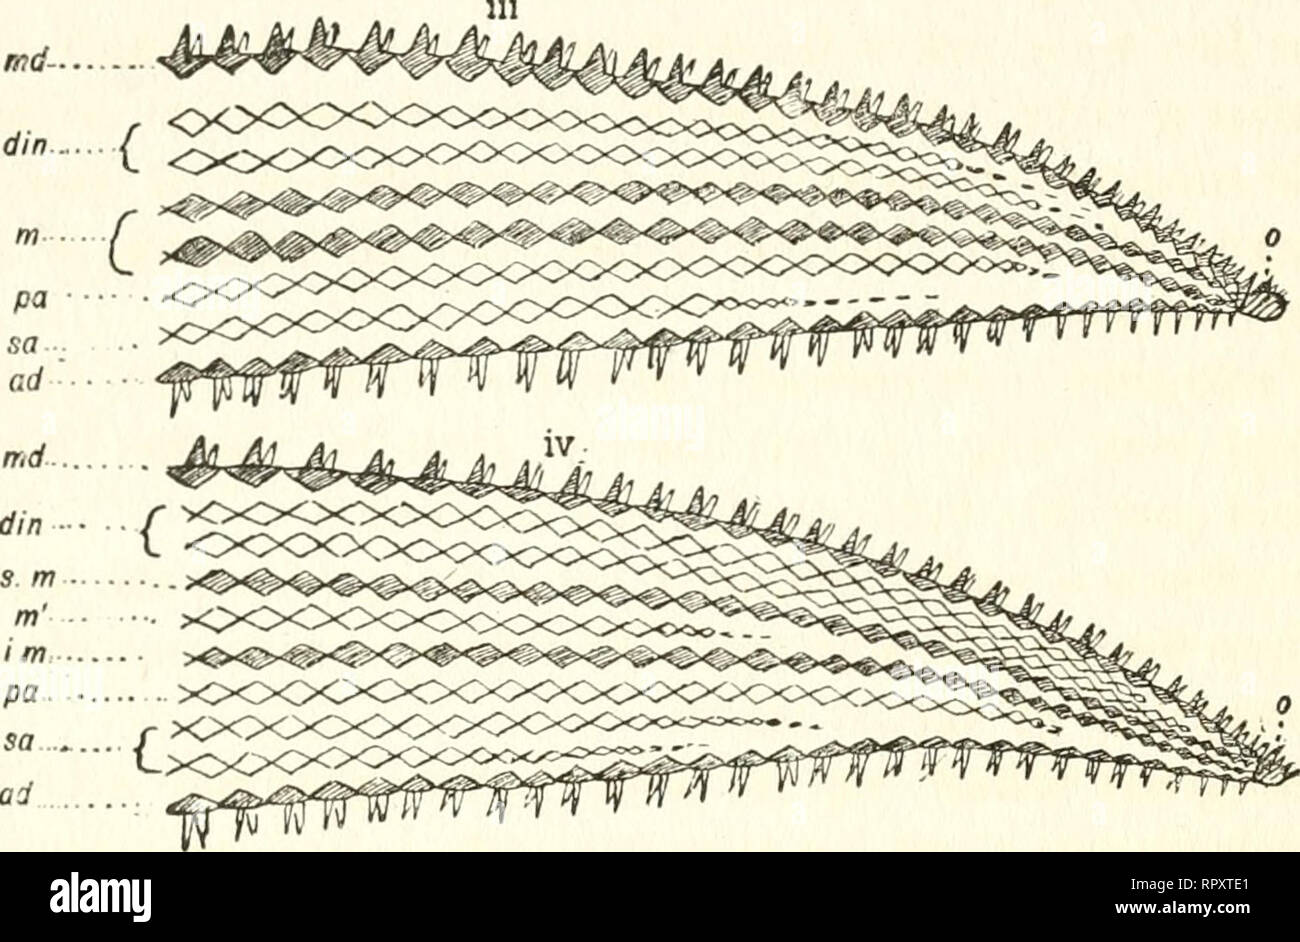 . Alaska. Natural history -- Alaska; Scientific expeditions; Alaska. f-f^^tttTtffTfTTttTtnrnrfm. Fig. I. Diagrams generalized to illustrate progressive ontogenetic and phylogenetic development of the plates and spines in the rays of starfishes (.Asteriidce). Lettering as follows; the primary rows are shaded: md. Median dorsal or carinal row. tn, Marginal rows, m', Intermarginal row. sm, Superomarginal row. im, Inferomarginal row. ad, Adambulacral row. din, Dorsal-inter- mediate, medio-latcral, or dorse-lateral rows, p or pa, Peractinal row of plates, sa, Sub- actinal rows. These and the peract Stock Photo